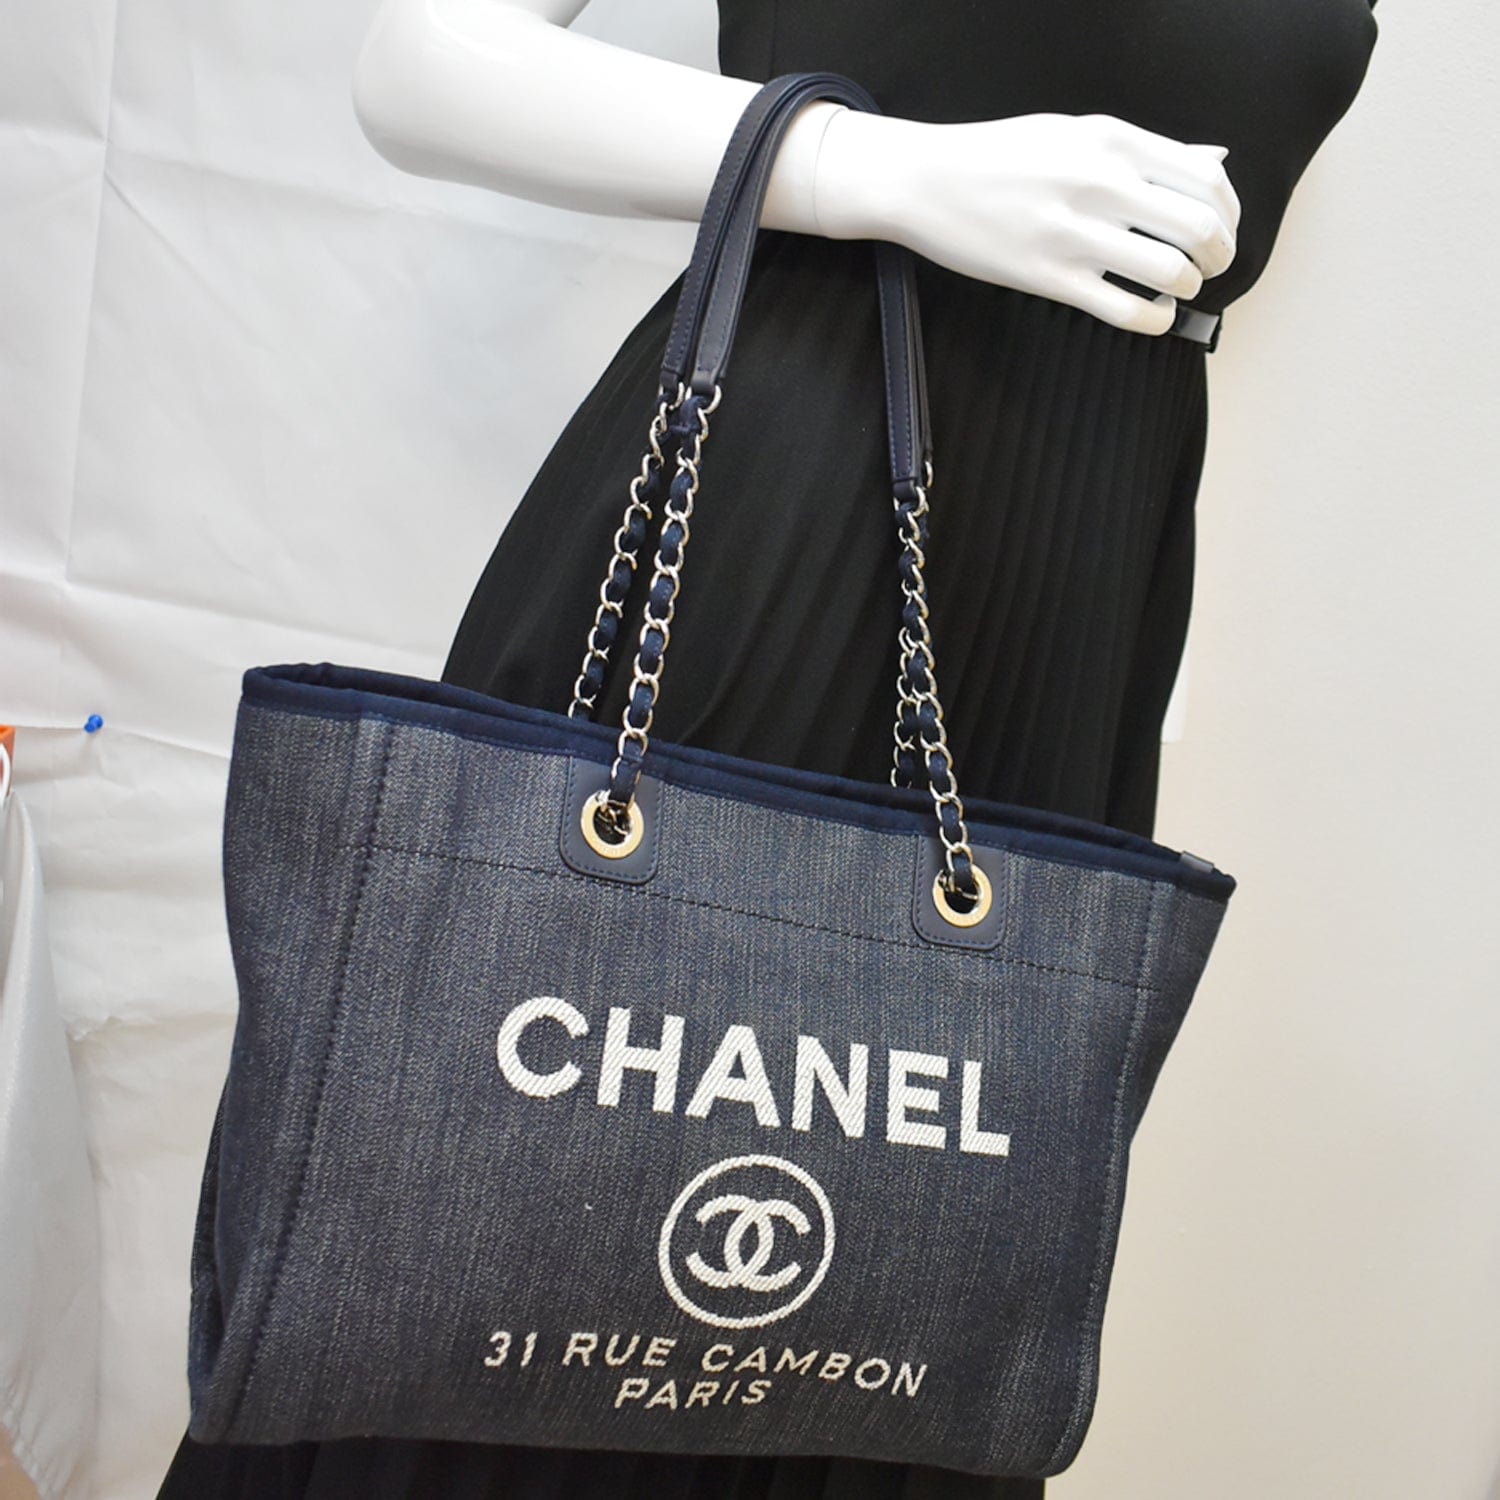 Embroidered Pu Leather CHANEL DEAUVILLE FABRIC TOTE DARK FABRIC HANDBAGS  FOR WOMEN